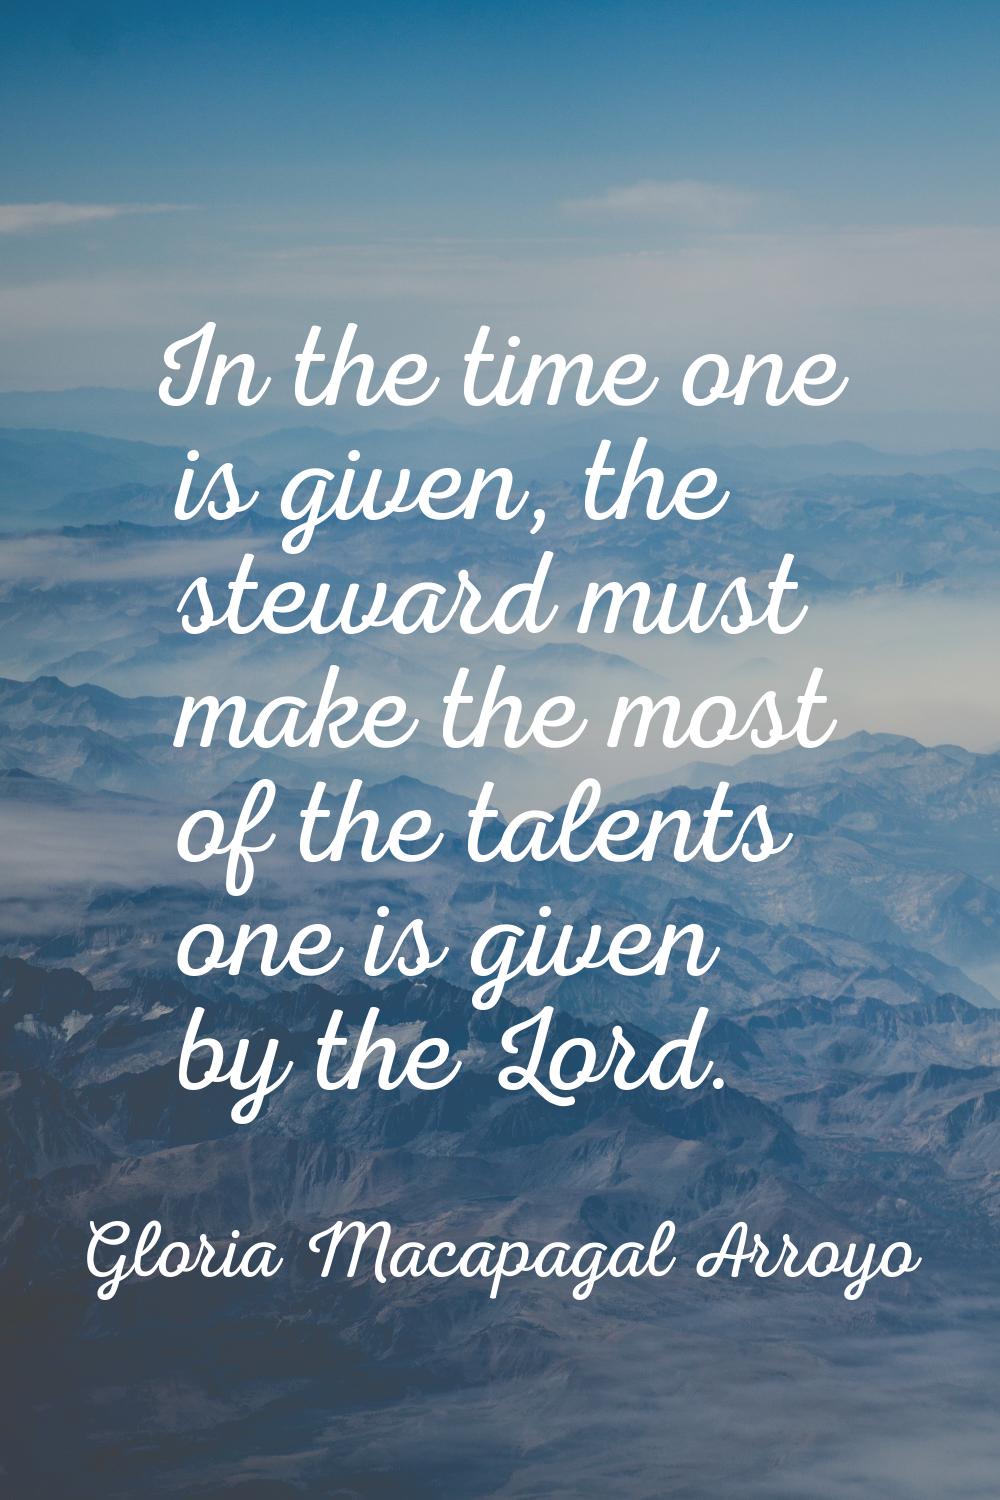 In the time one is given, the steward must make the most of the talents one is given by the Lord.